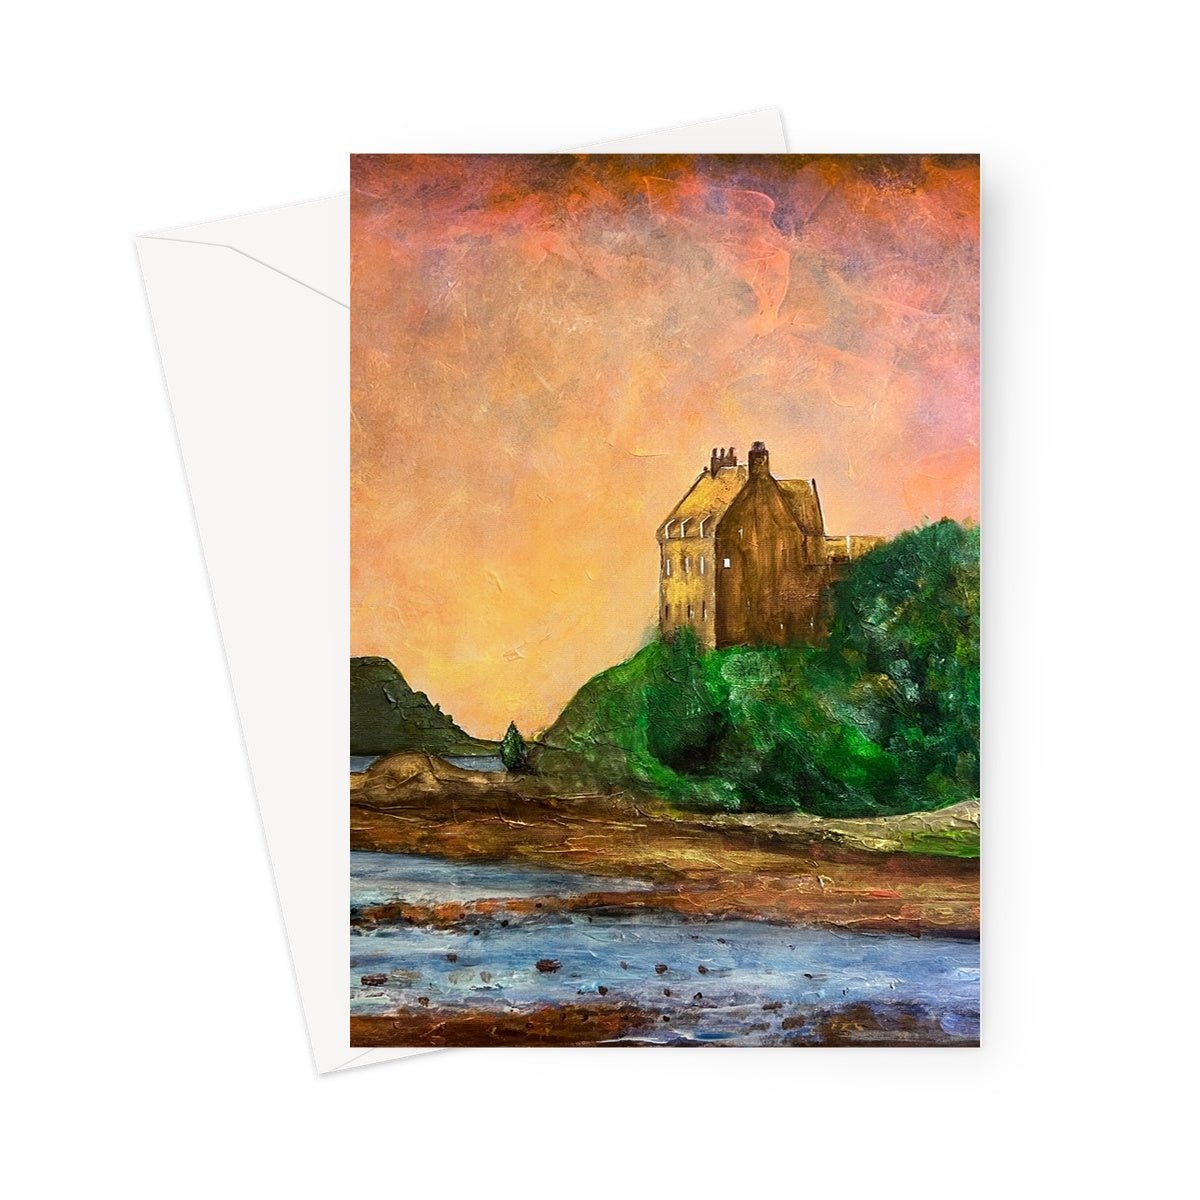 Duntrune Castle Art Gifts Greeting Card-Greetings Cards-Scottish Castles Art Gallery-5"x7"-1 Card-Paintings, Prints, Homeware, Art Gifts From Scotland By Scottish Artist Kevin Hunter